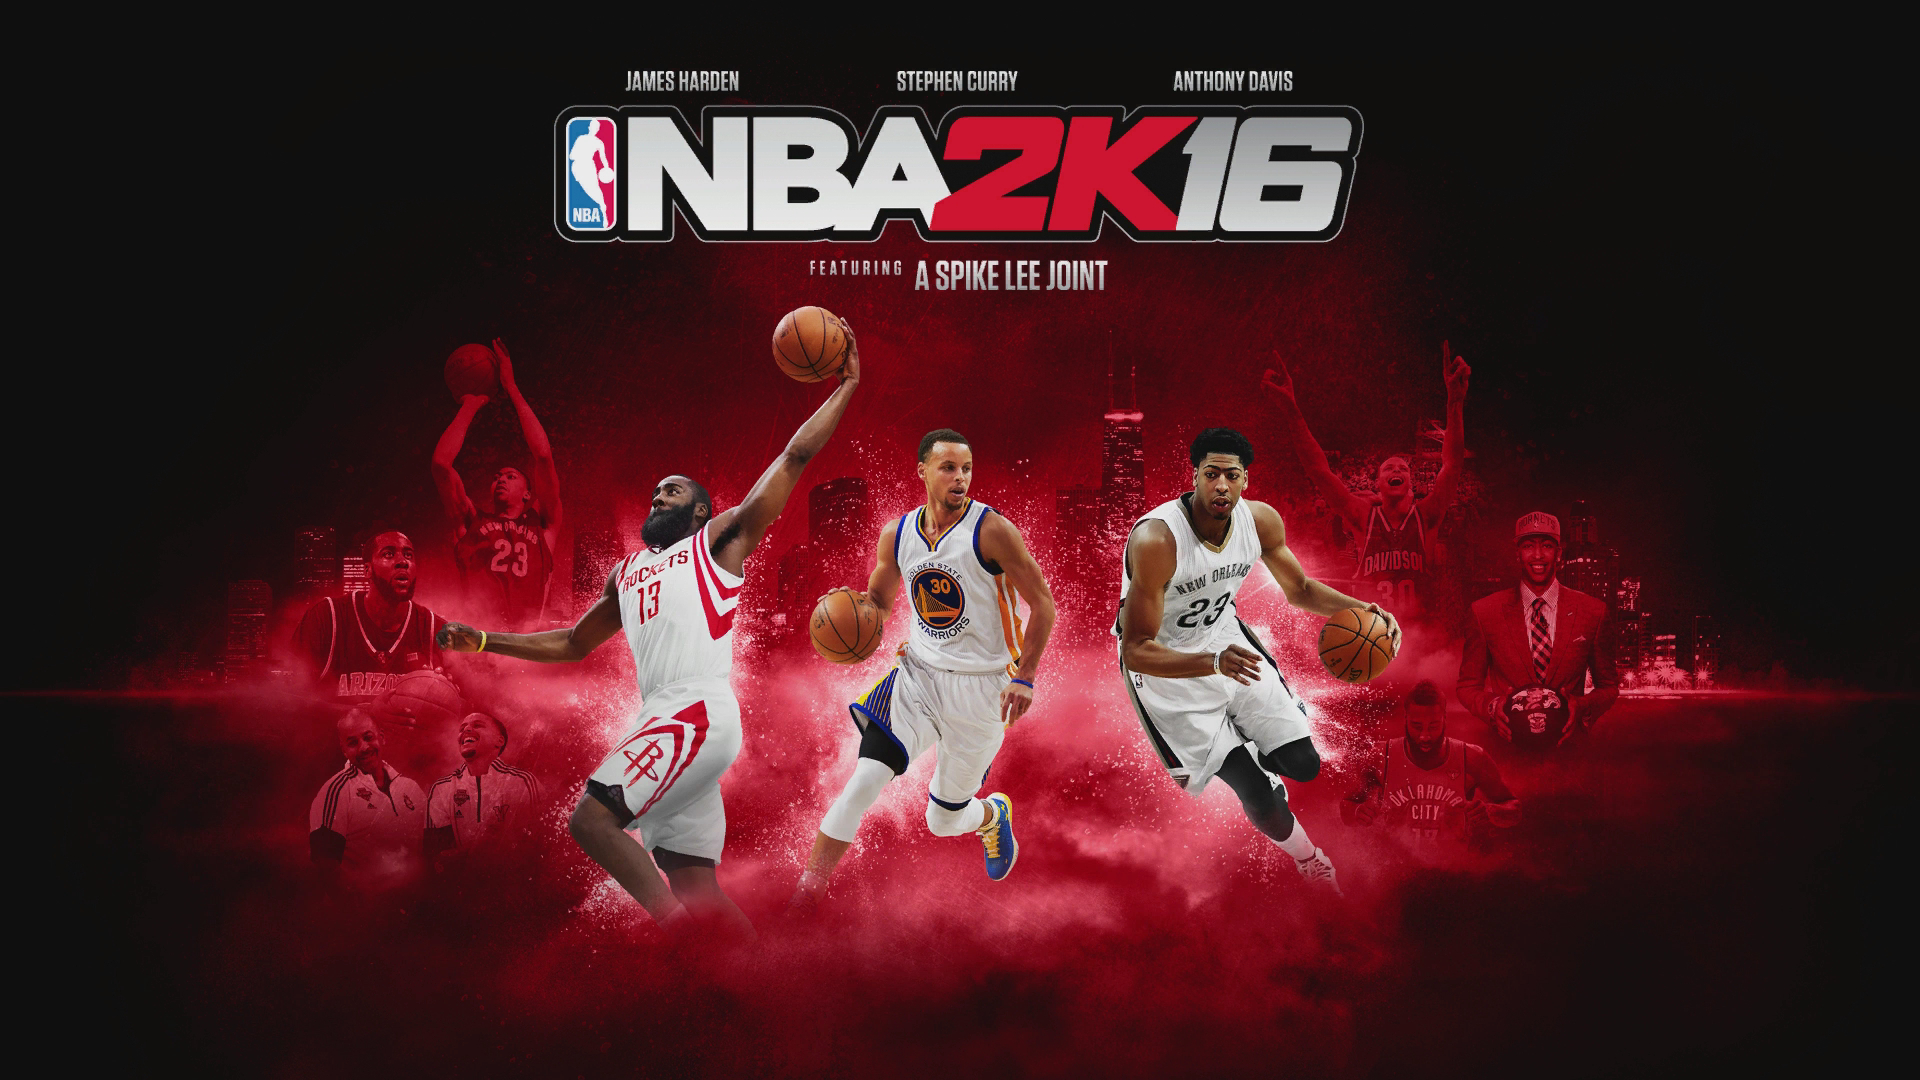 NBA 2K16 Game Download (Velocity) Free For Mobile